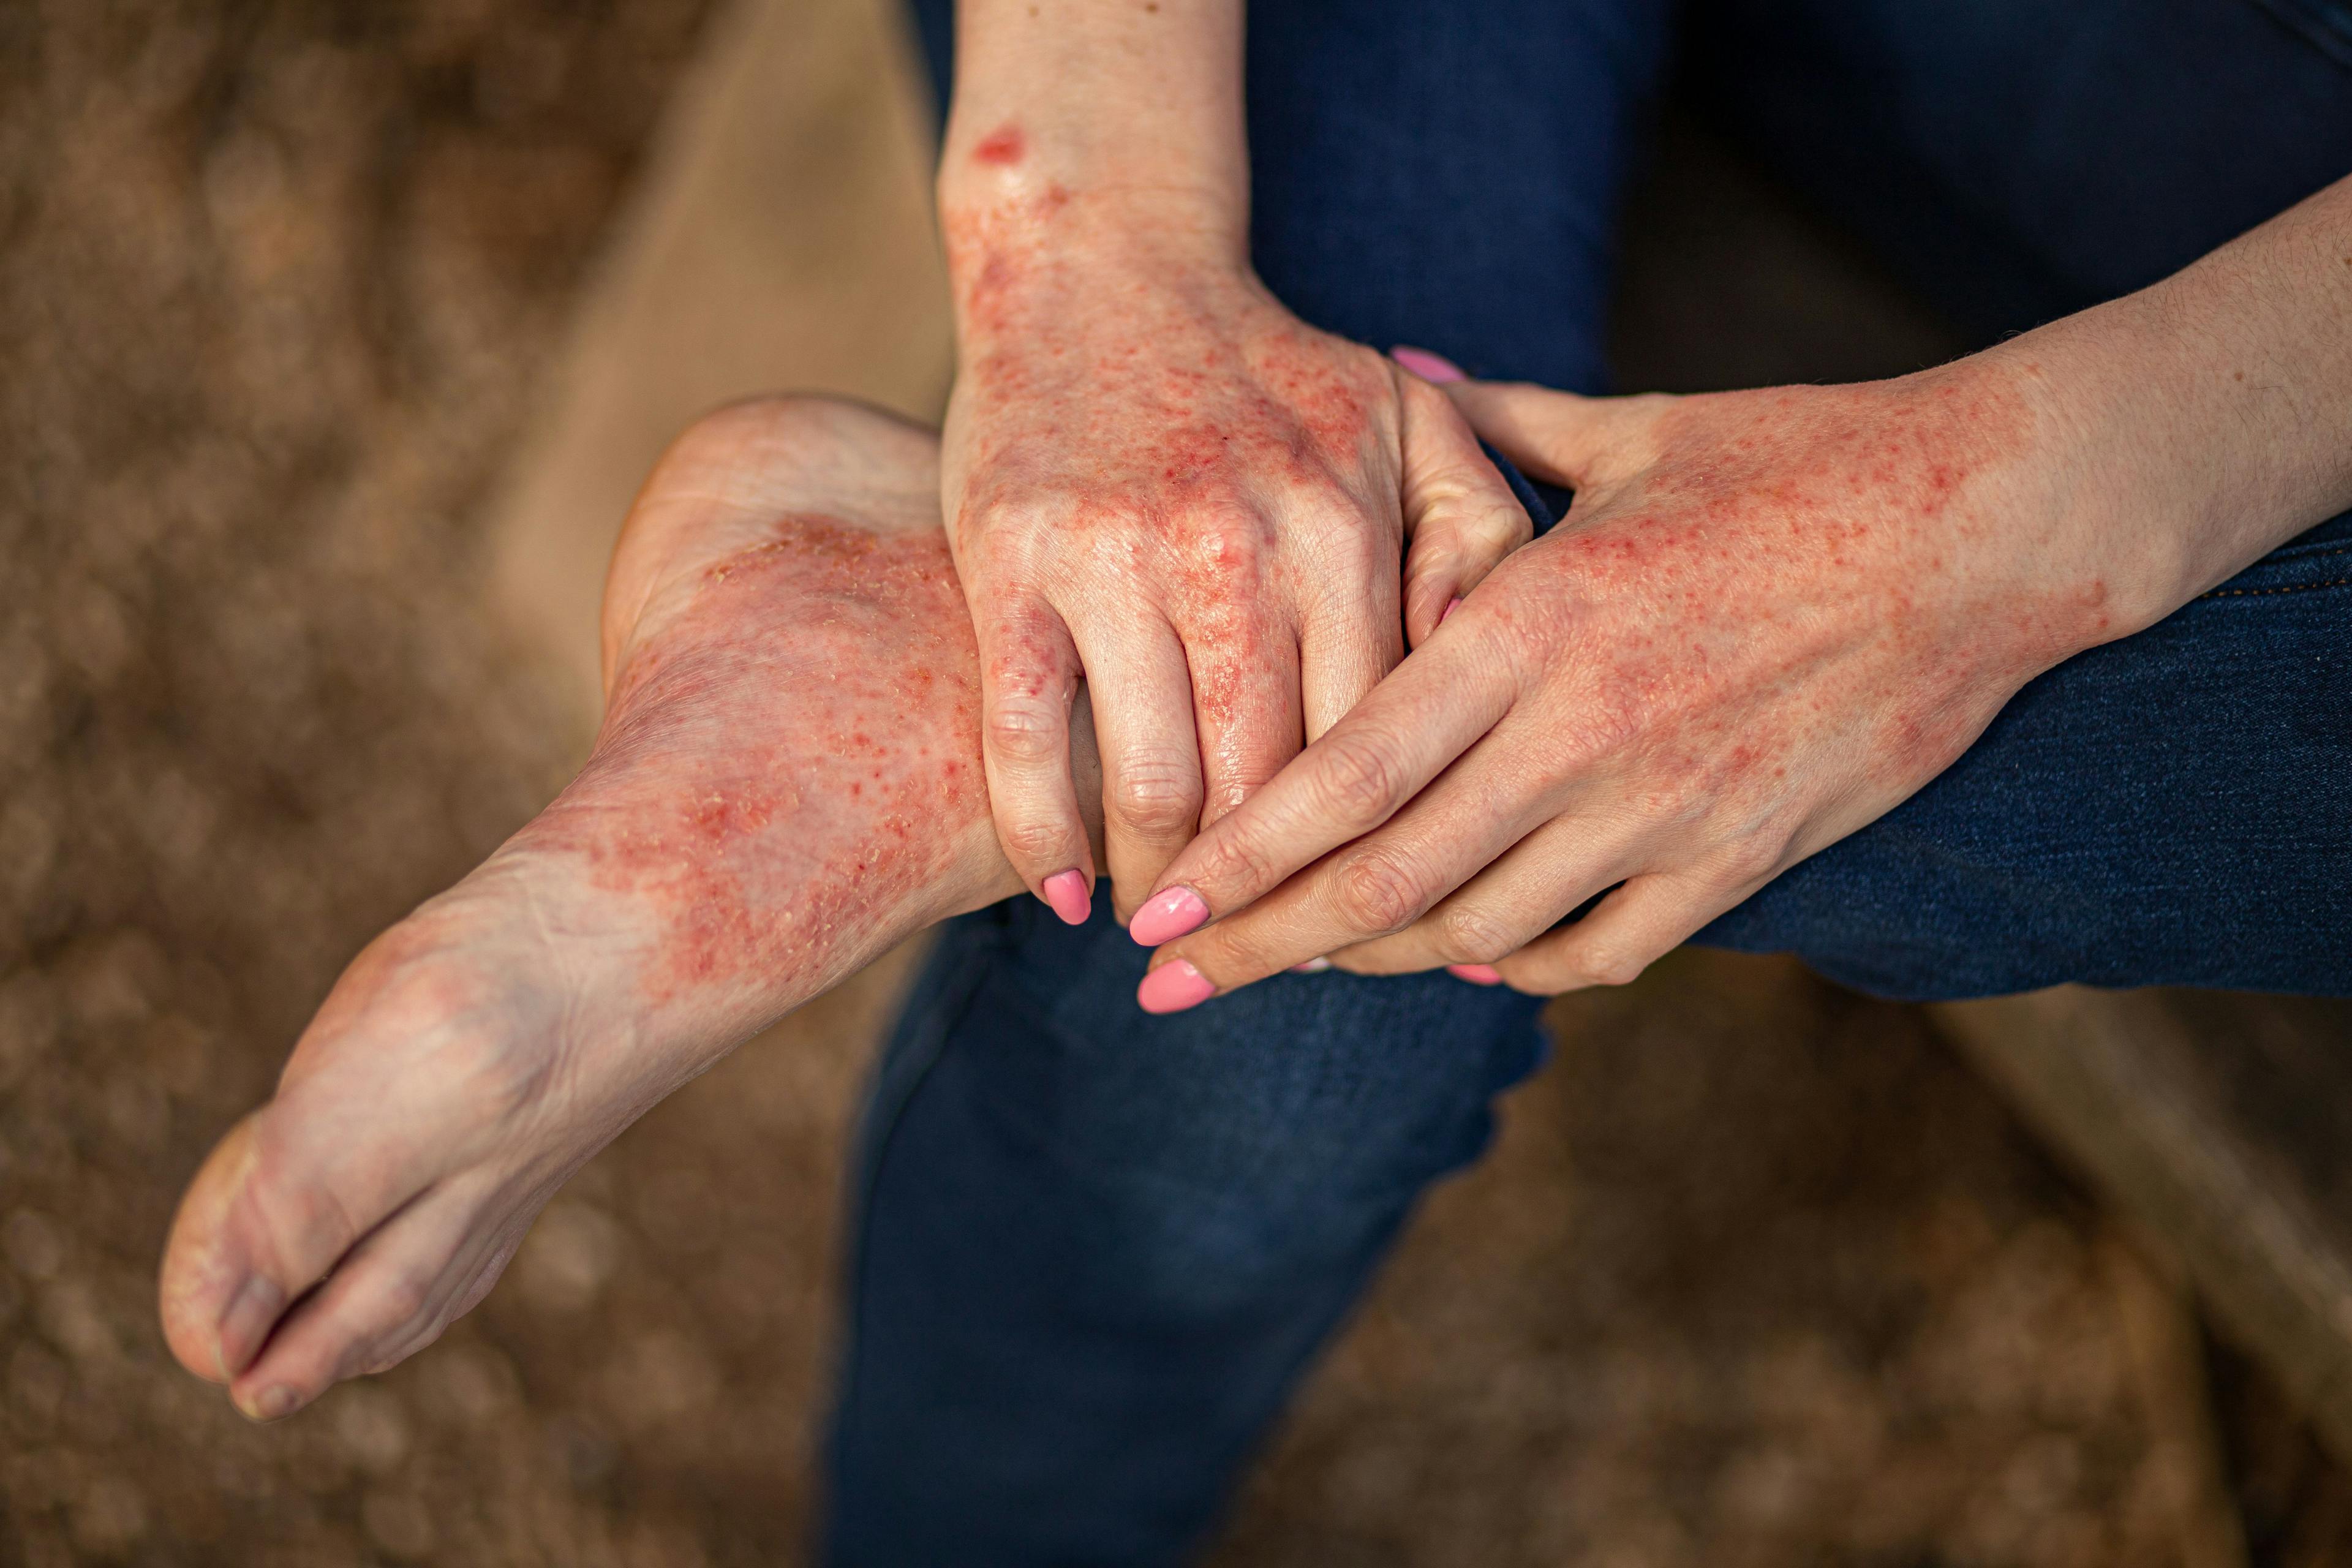 Efficacy of Dupilumab in Treating Atopic Hand and Foot Dermatitis 